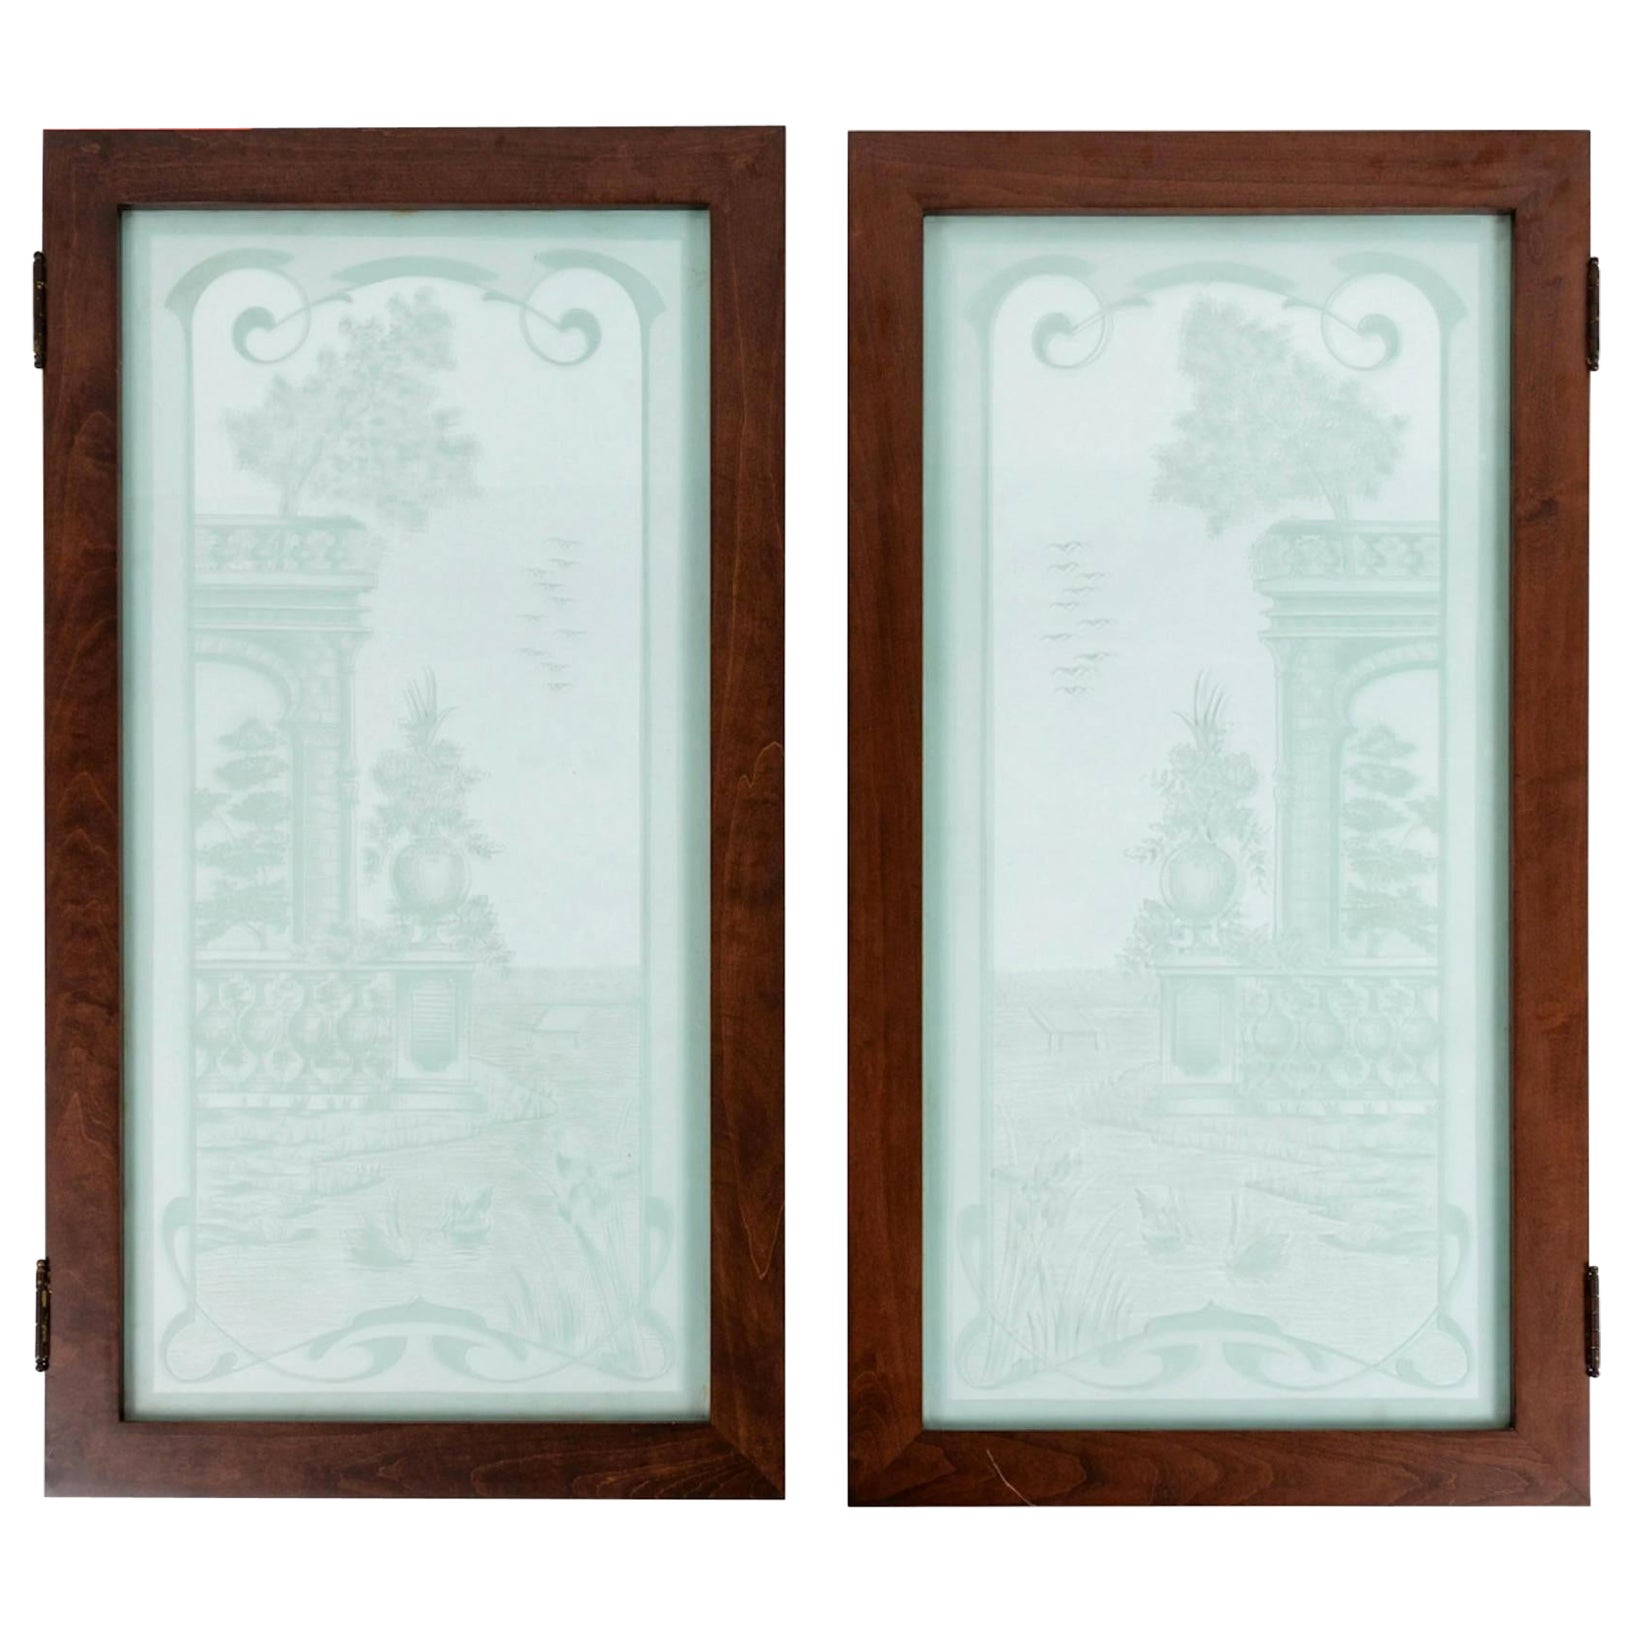 A Pair of Art Nouveau Style Etched Glass Windows 19th Century depicting swans. For Sale